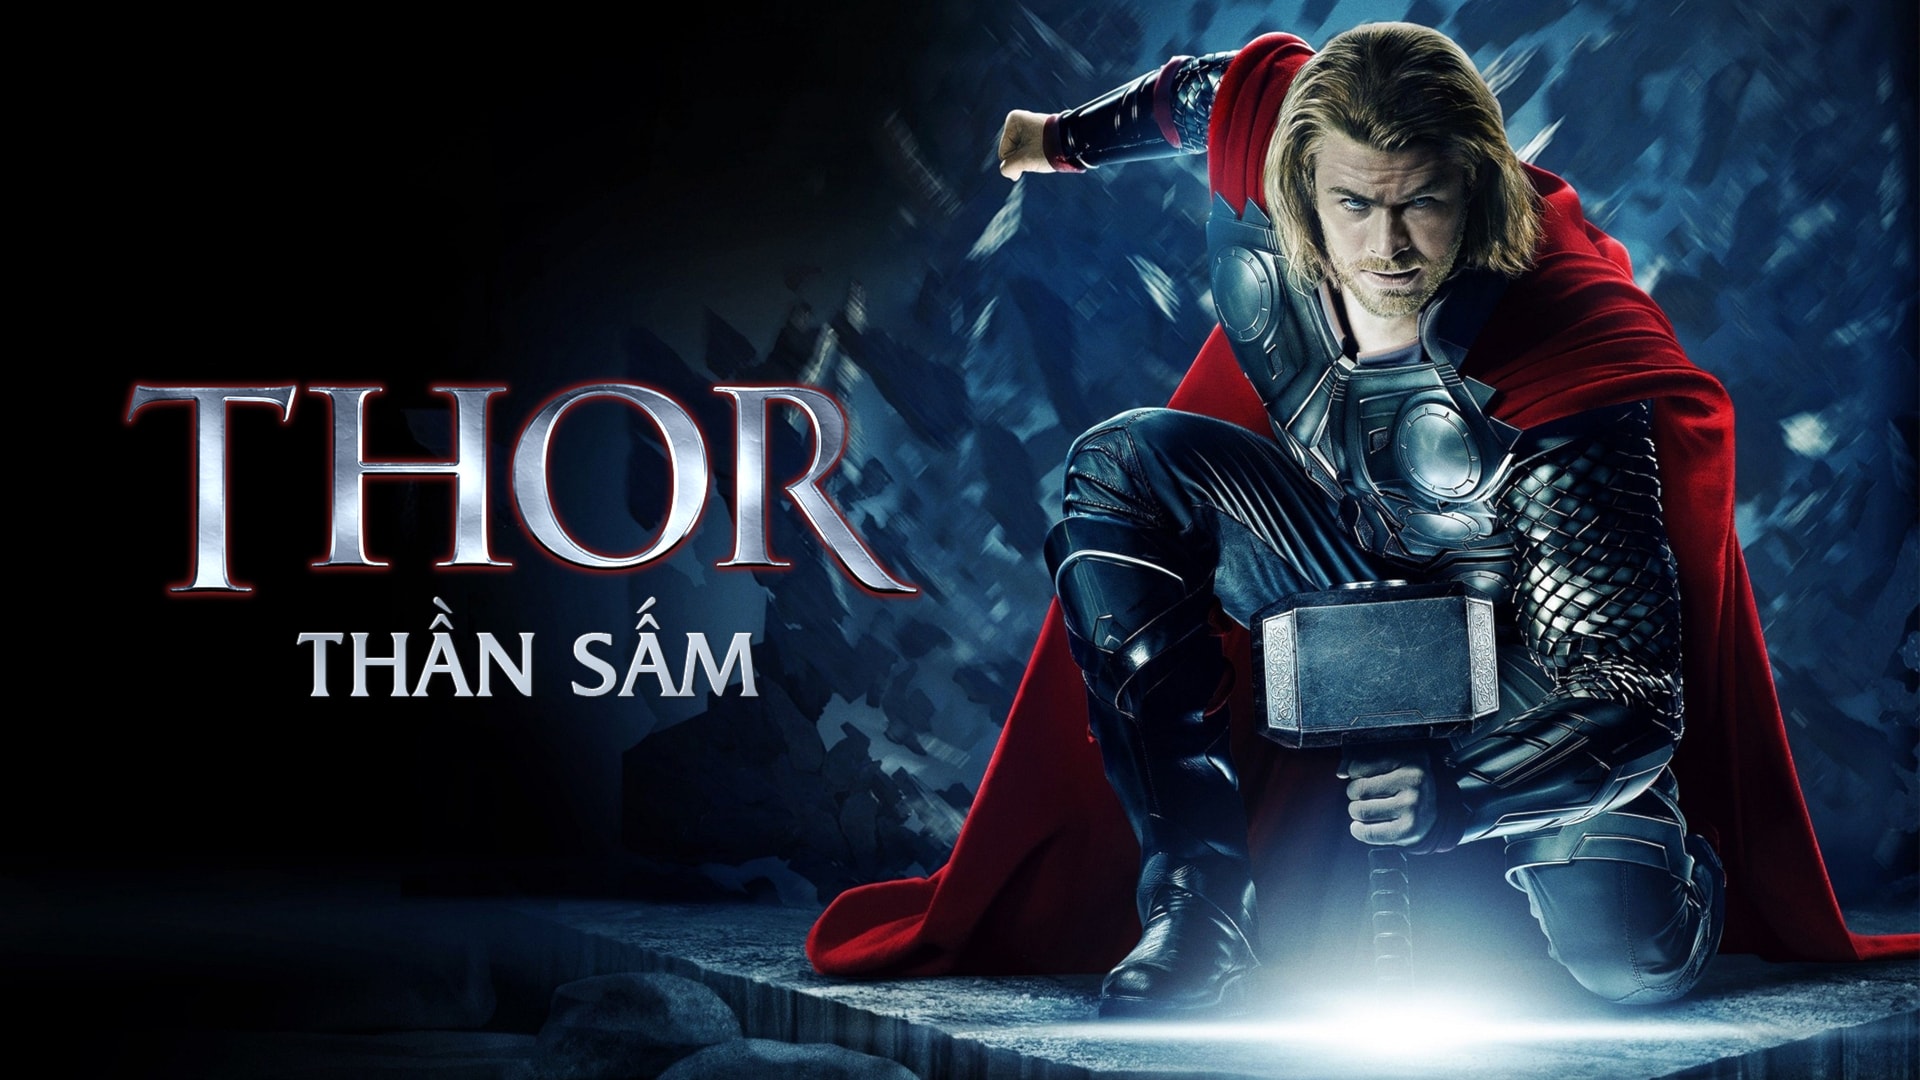 xem phim thần sấm – thor (2011)free games to play with girlfriend